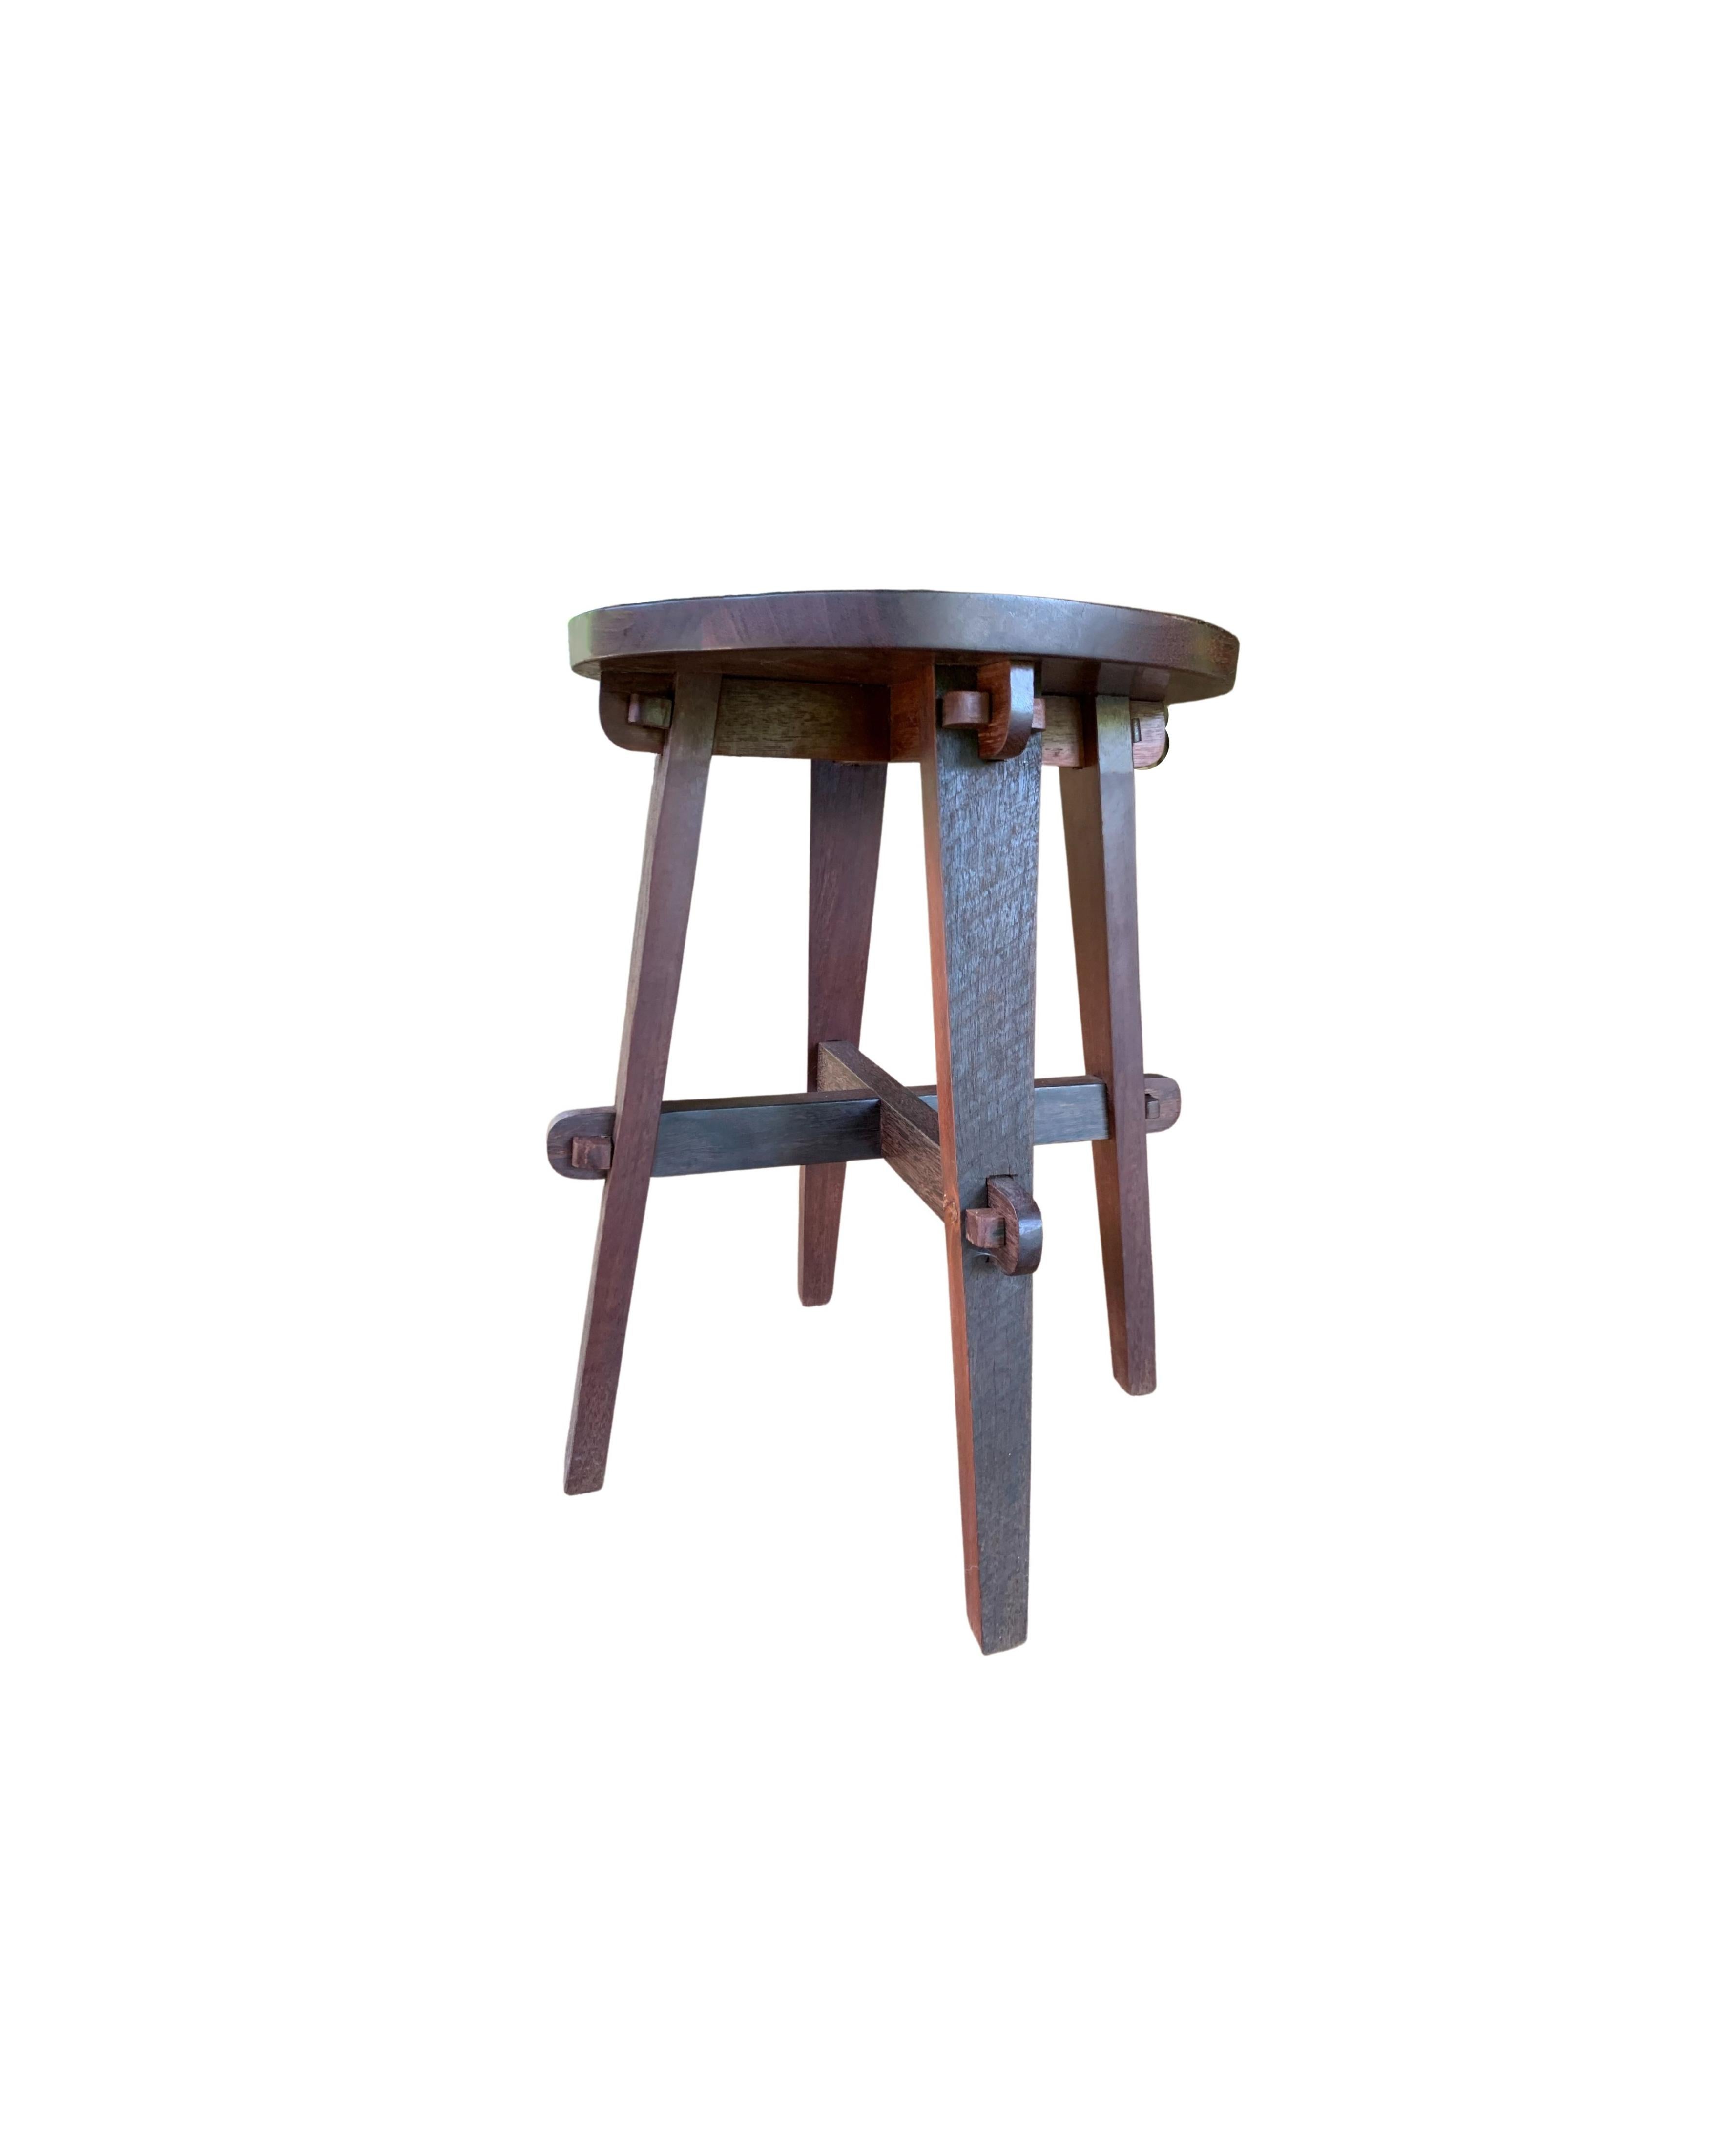 Indonesian Ironwood Stool Modern Organic, Hand Crafted with Artisanal Wood Joinery For Sale